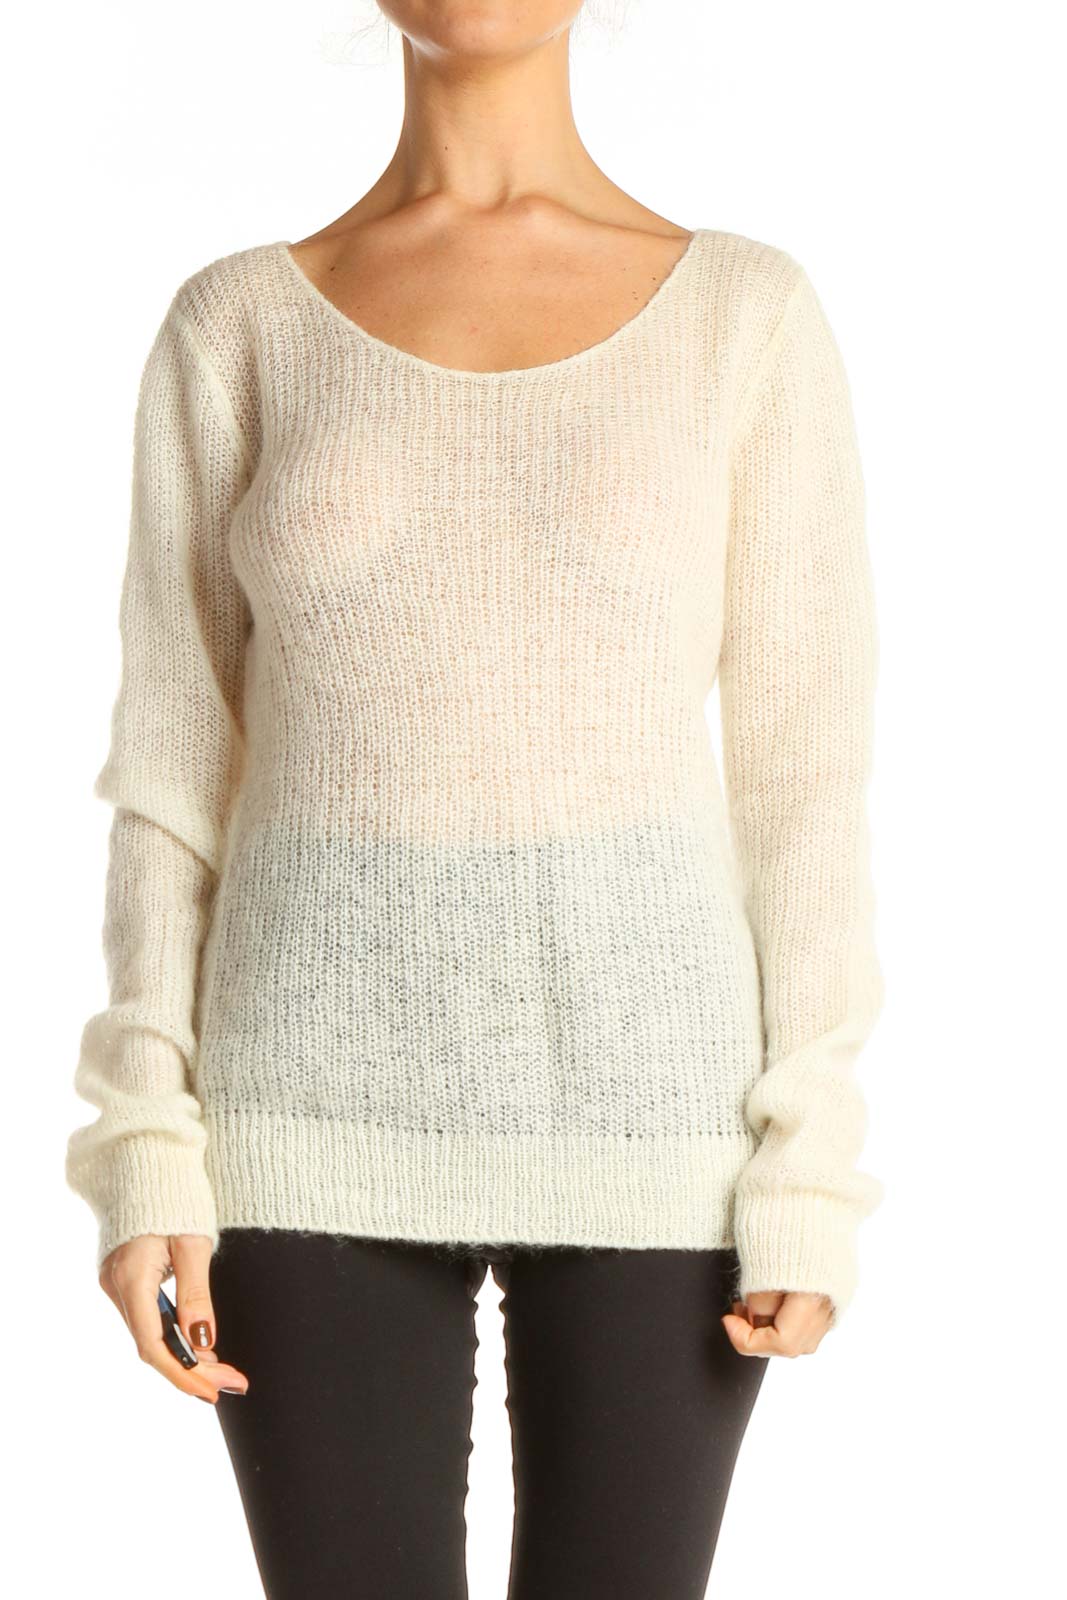 White Textured All Day Wear Sweater Front